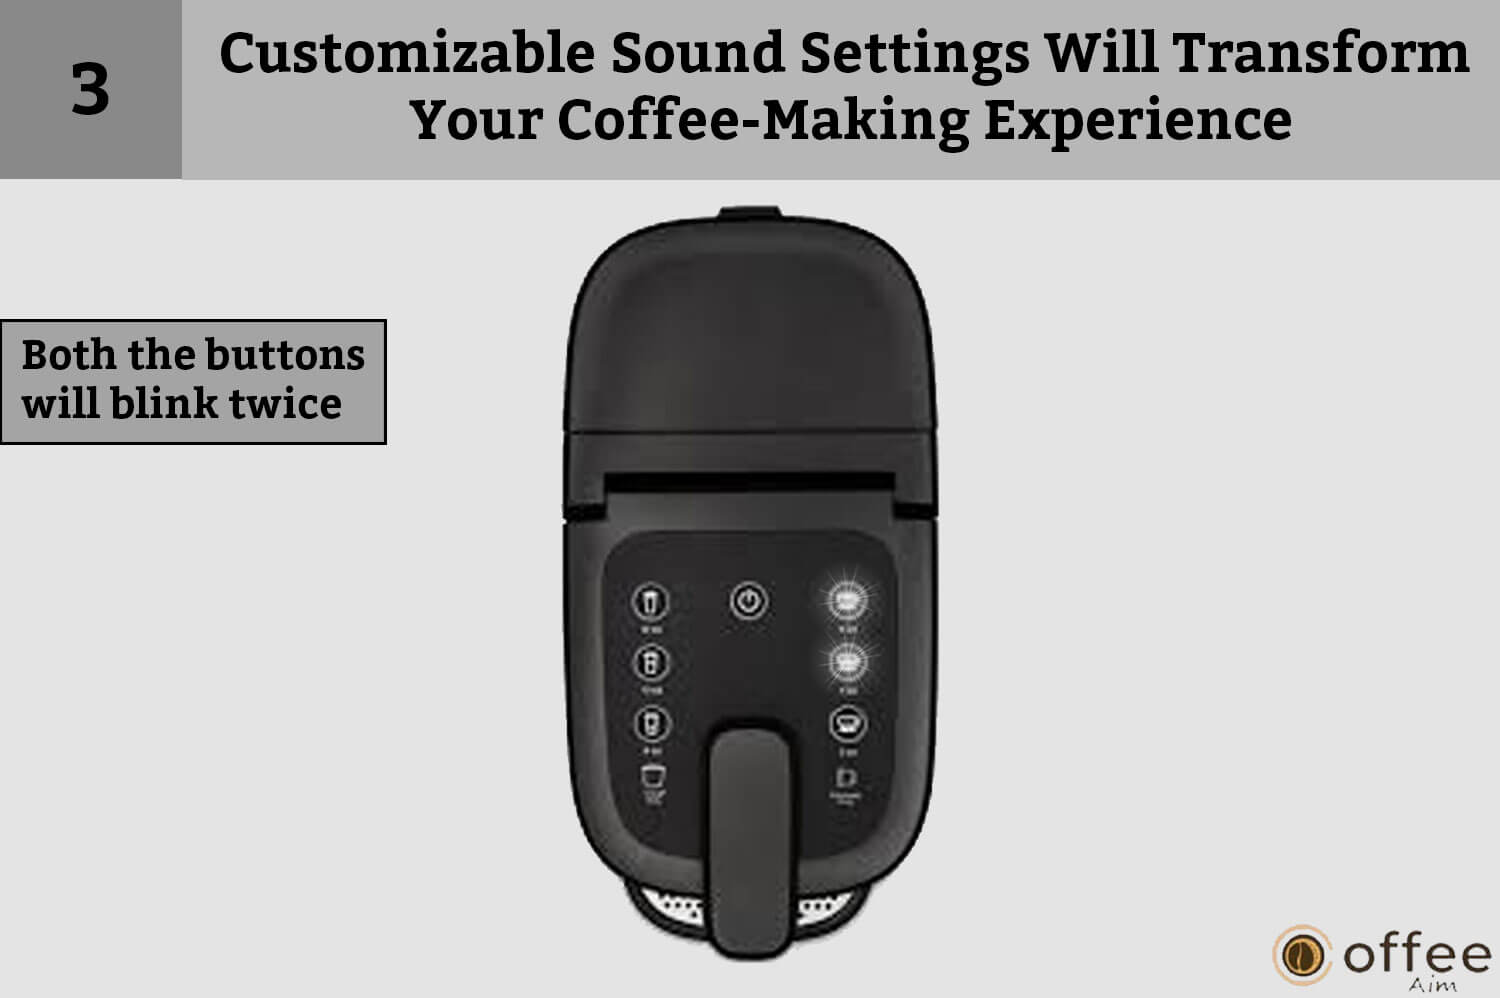 
This image illustrates that both buttons will blink twice as part of the customizable sound settings, enhancing your coffee-making experience when connecting the Nespresso Vertuo Creatista machine.